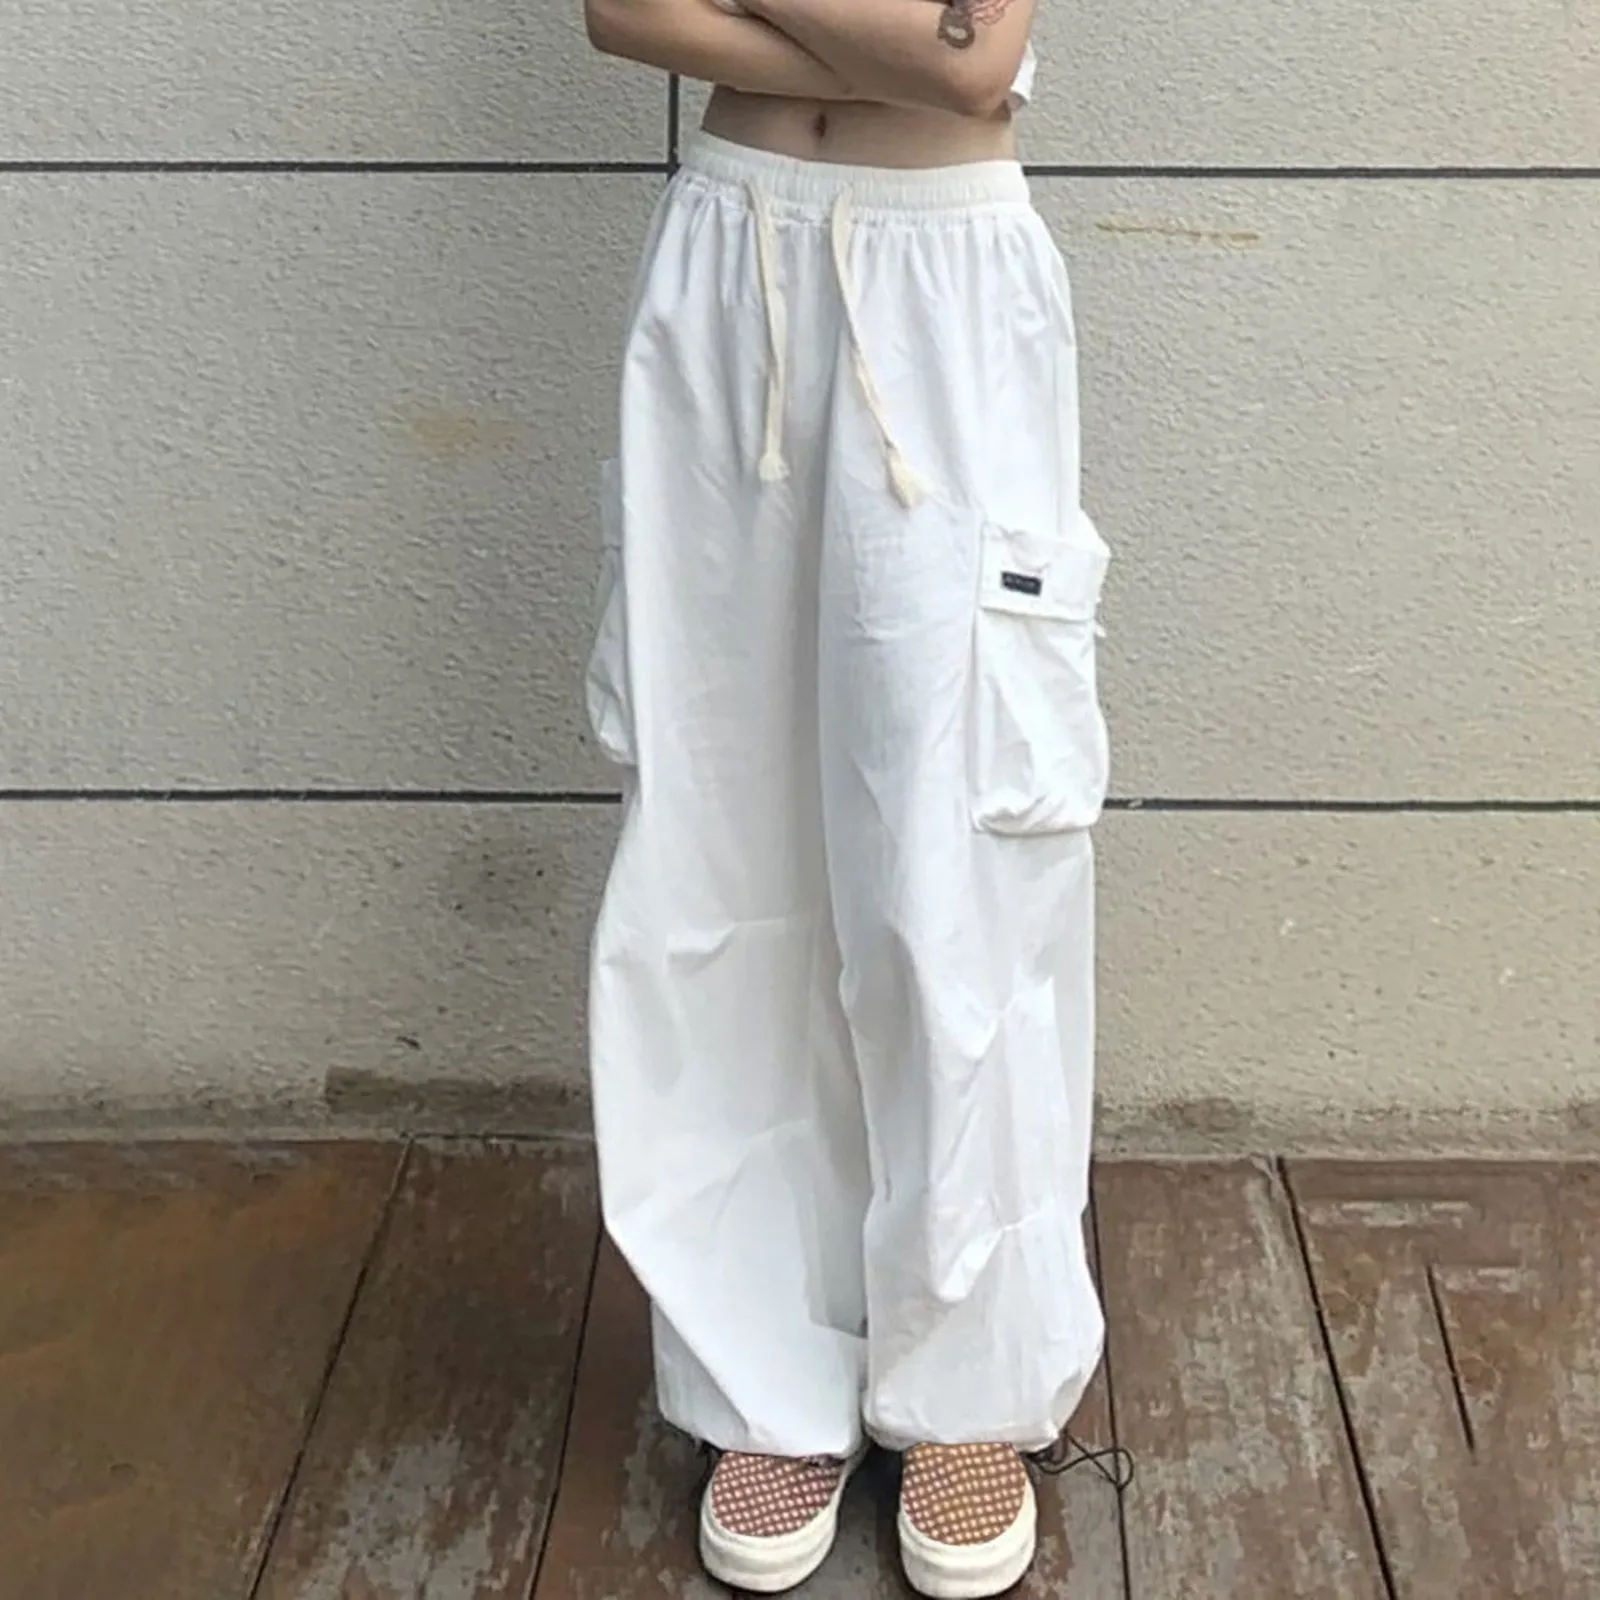 

Women Fashion Trousers Streetwear Wide Leg High Waist Straight Vintage Baggy Overalls Cargo Pants With Pockets Drawstring Pants